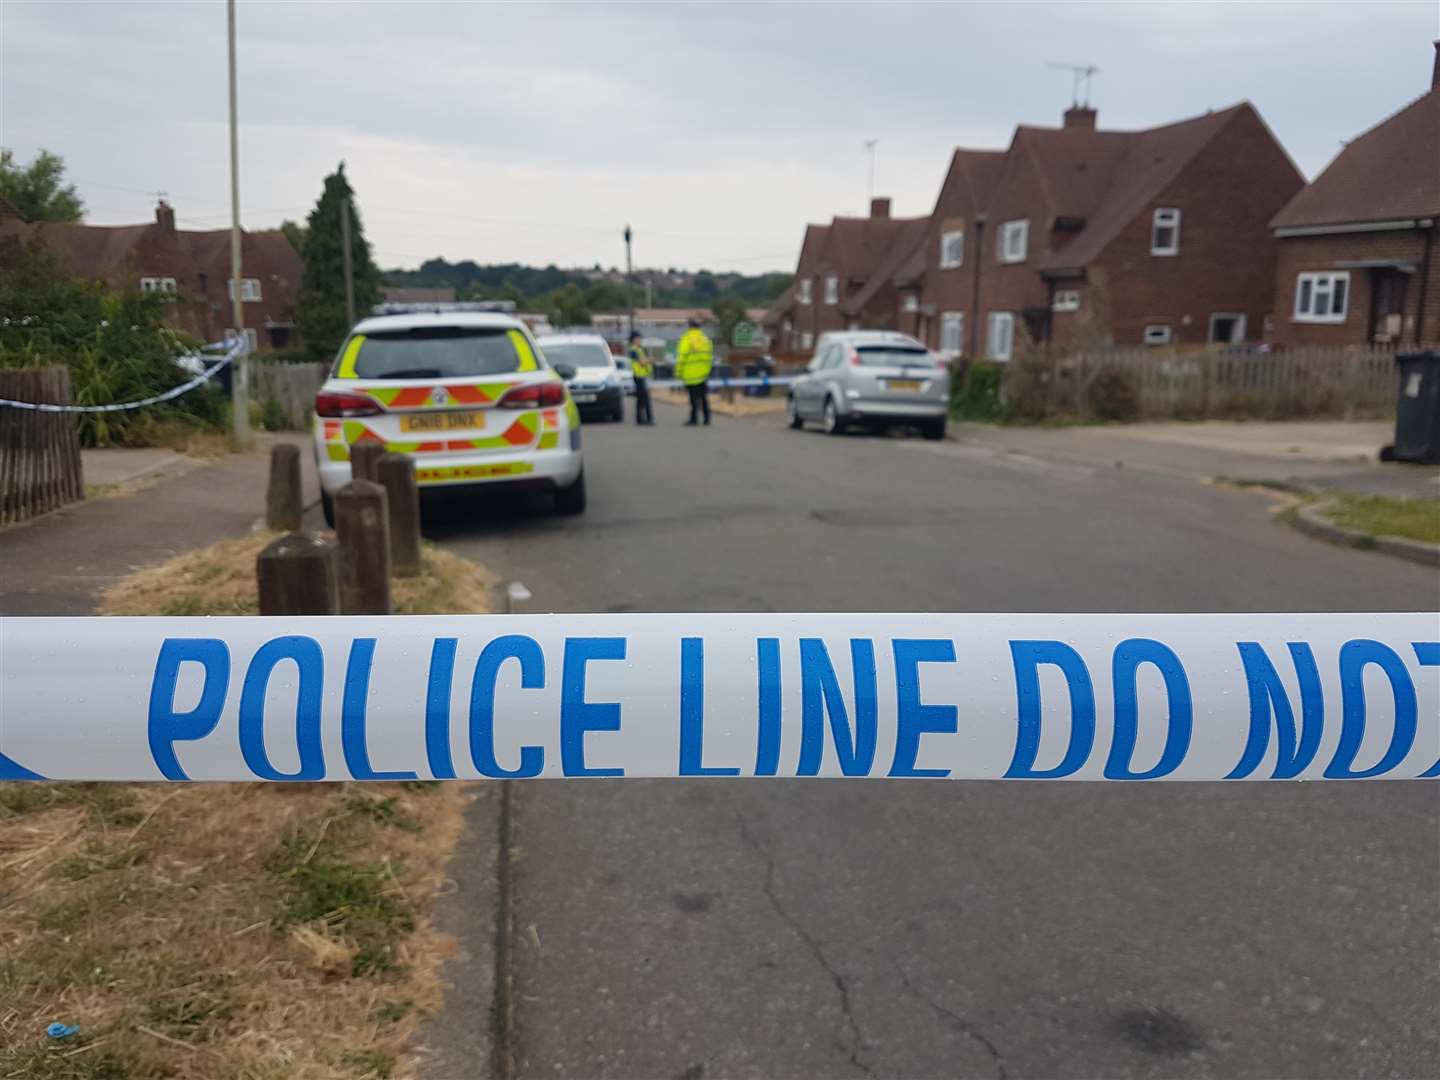 Godwin Road, Thanington, was cordoned off by police